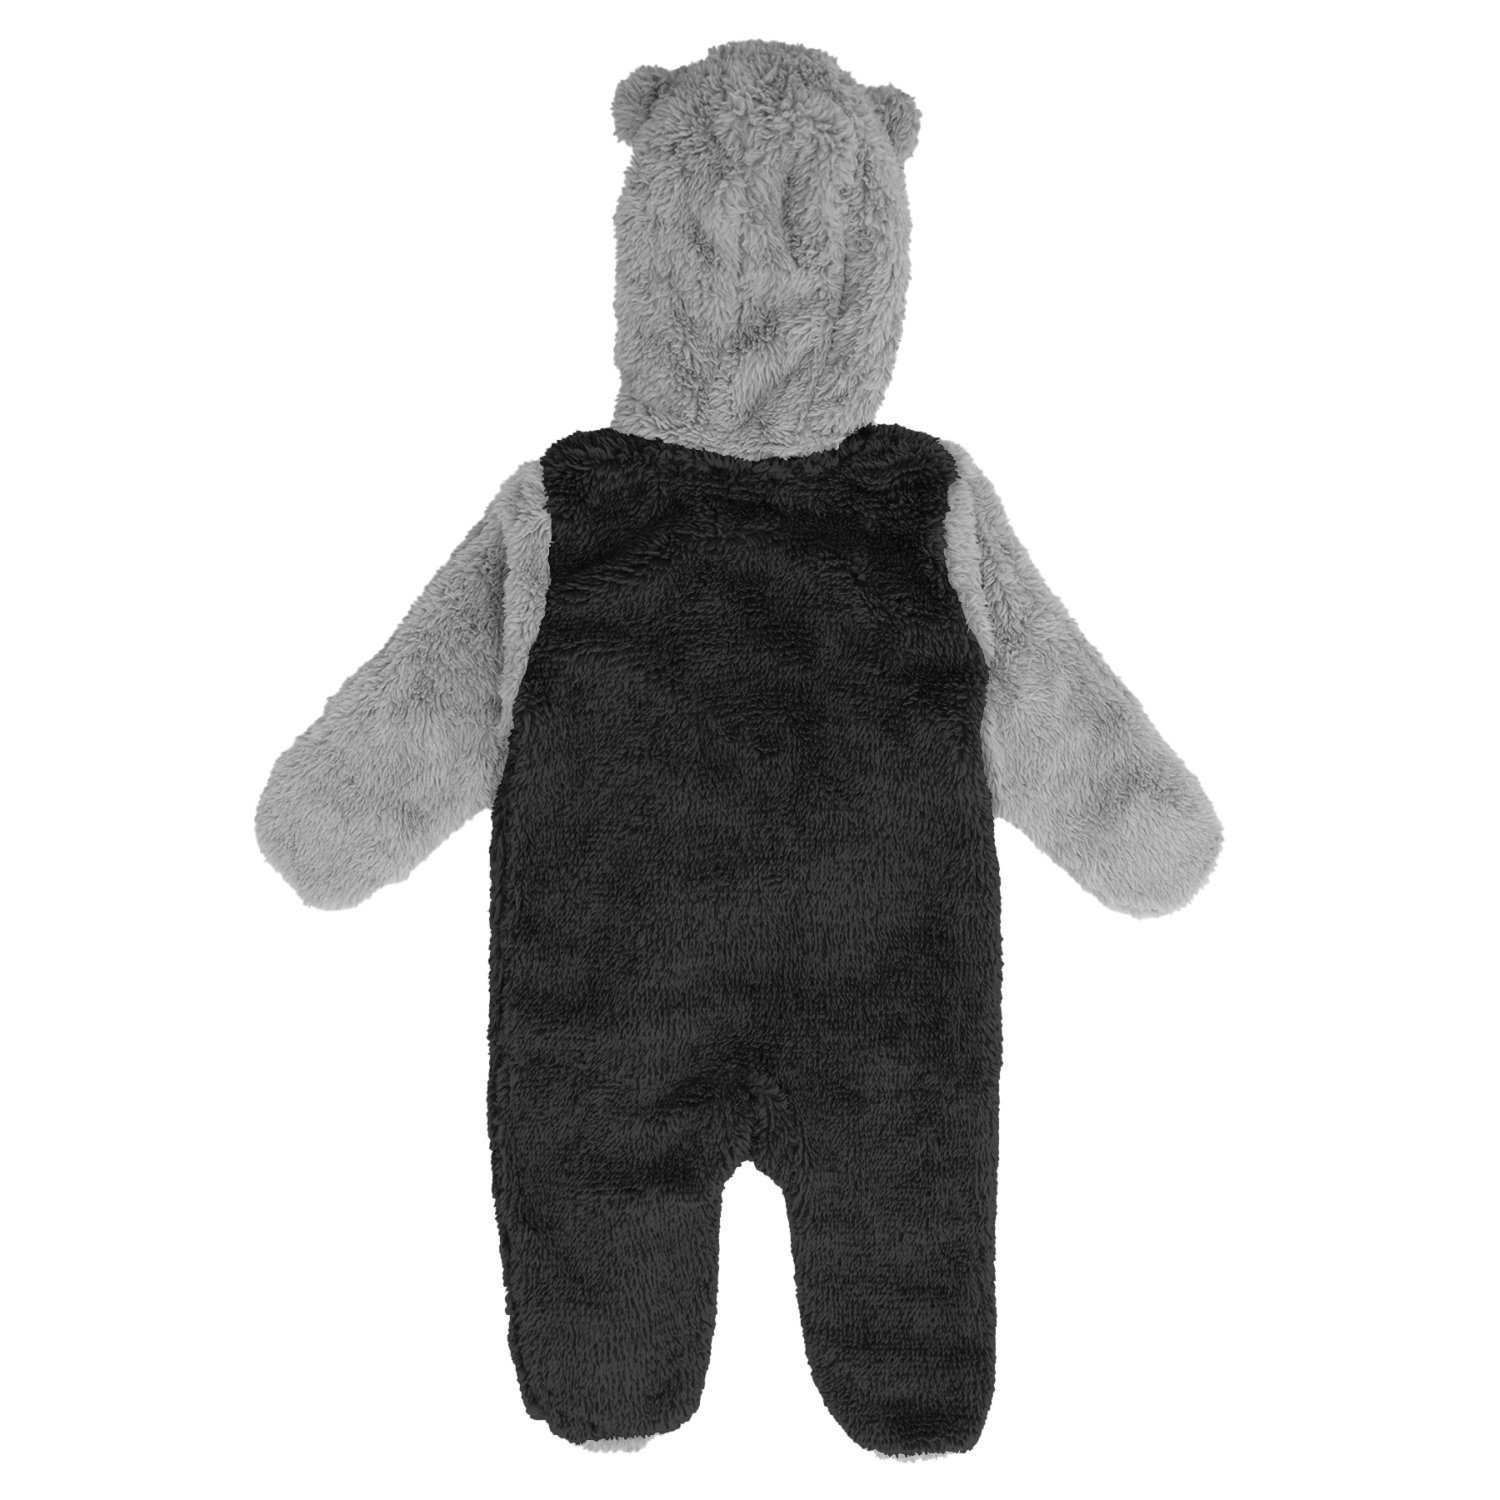 Outerstuff Kapuzenpullover NFL Teddy Overall Steelers Pittsburgh